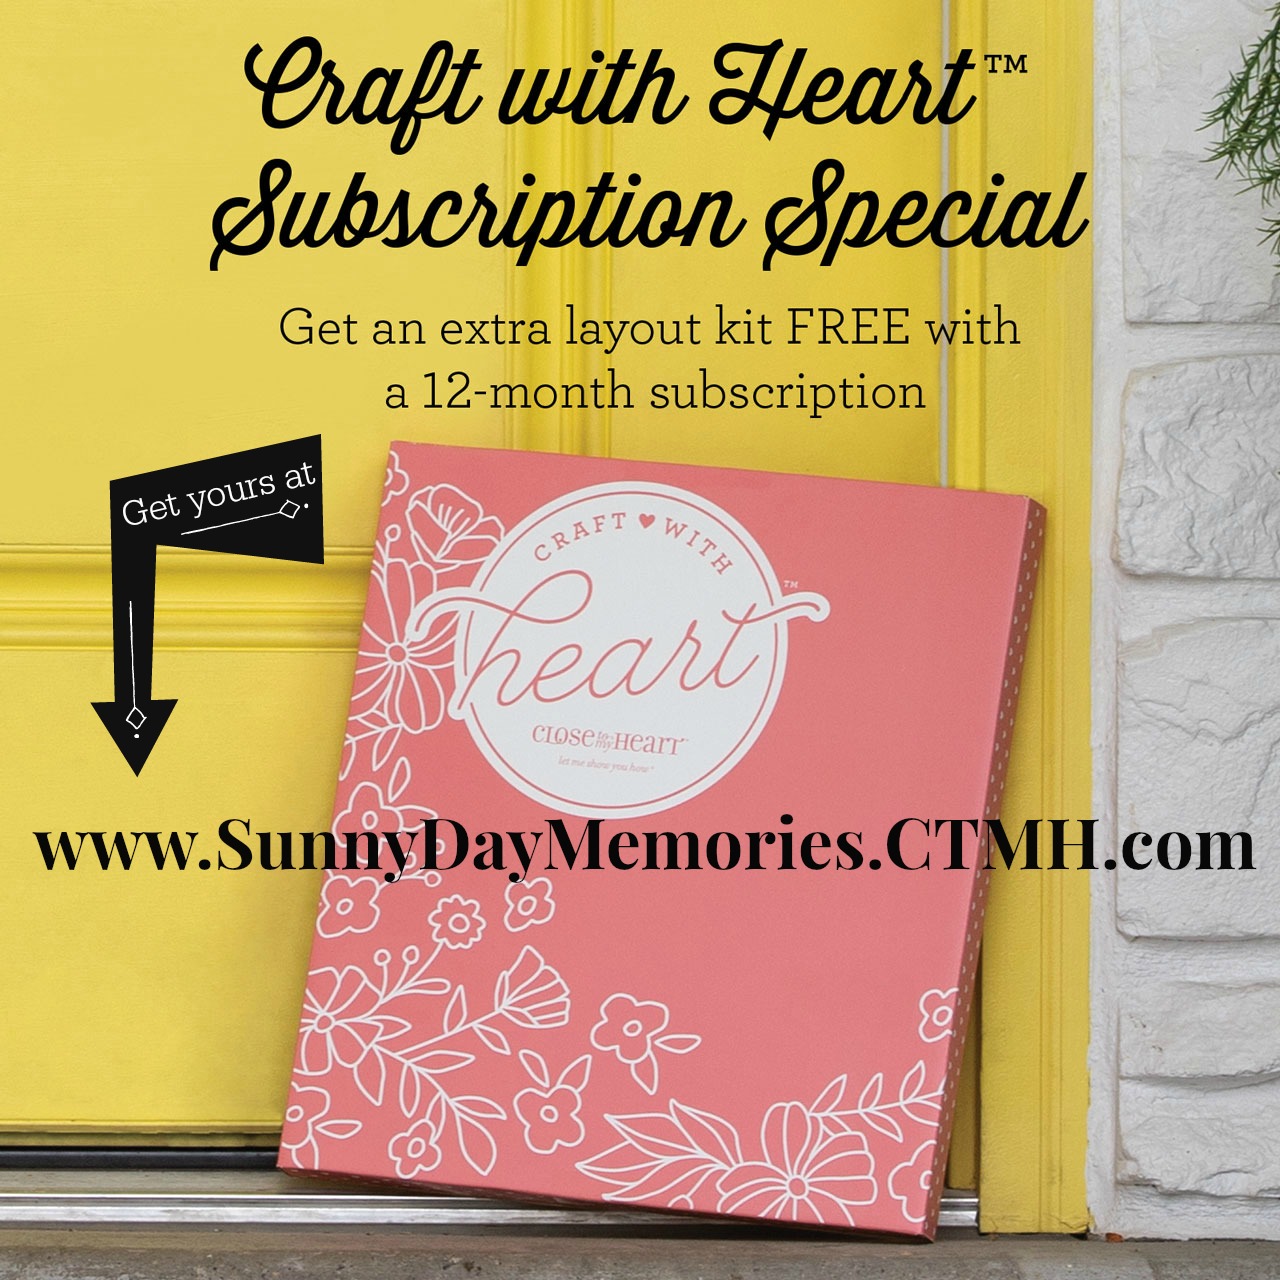 CTMH Craft with Heart Special